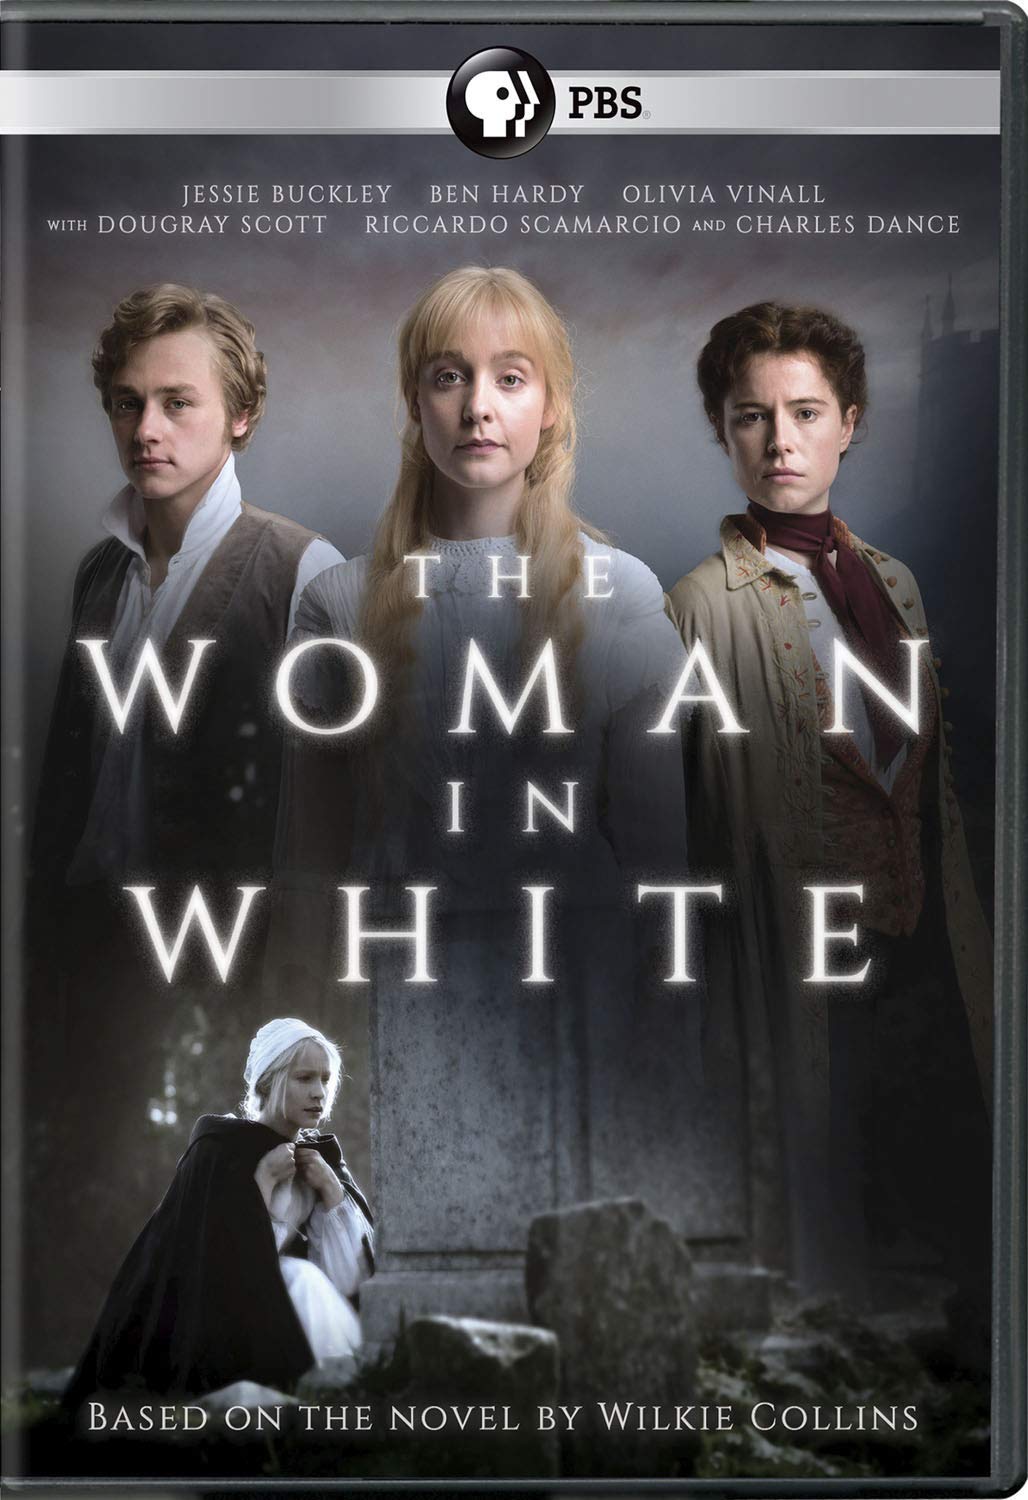 The woman in white [DVD] (2018).